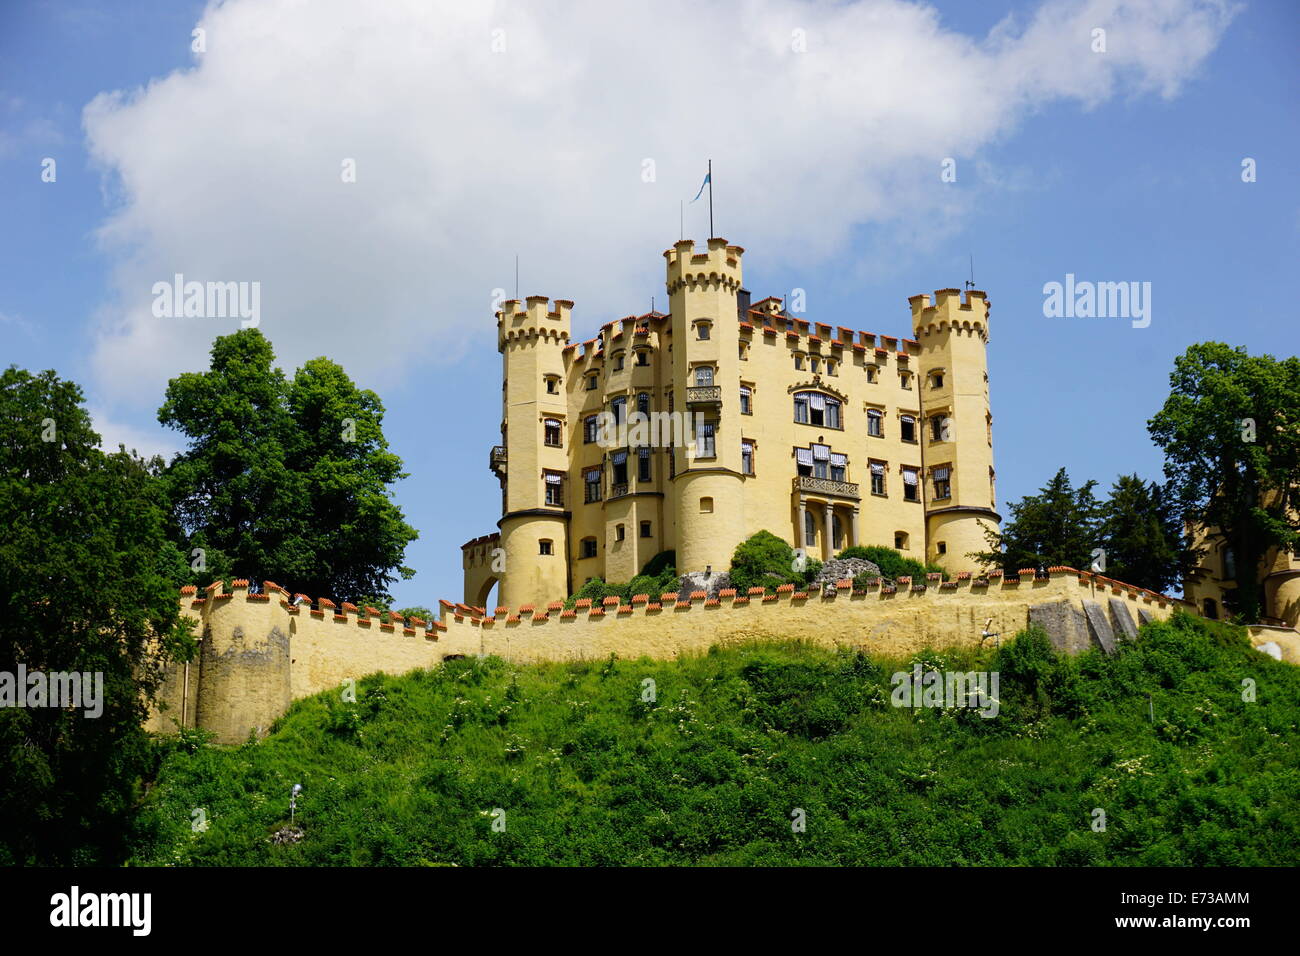 Schloss Hohenschwangau, the former palace of Ludwig the second, at Hohenschwangau village, near Fussen, Bavaria, Germany, Europe Stock Photo